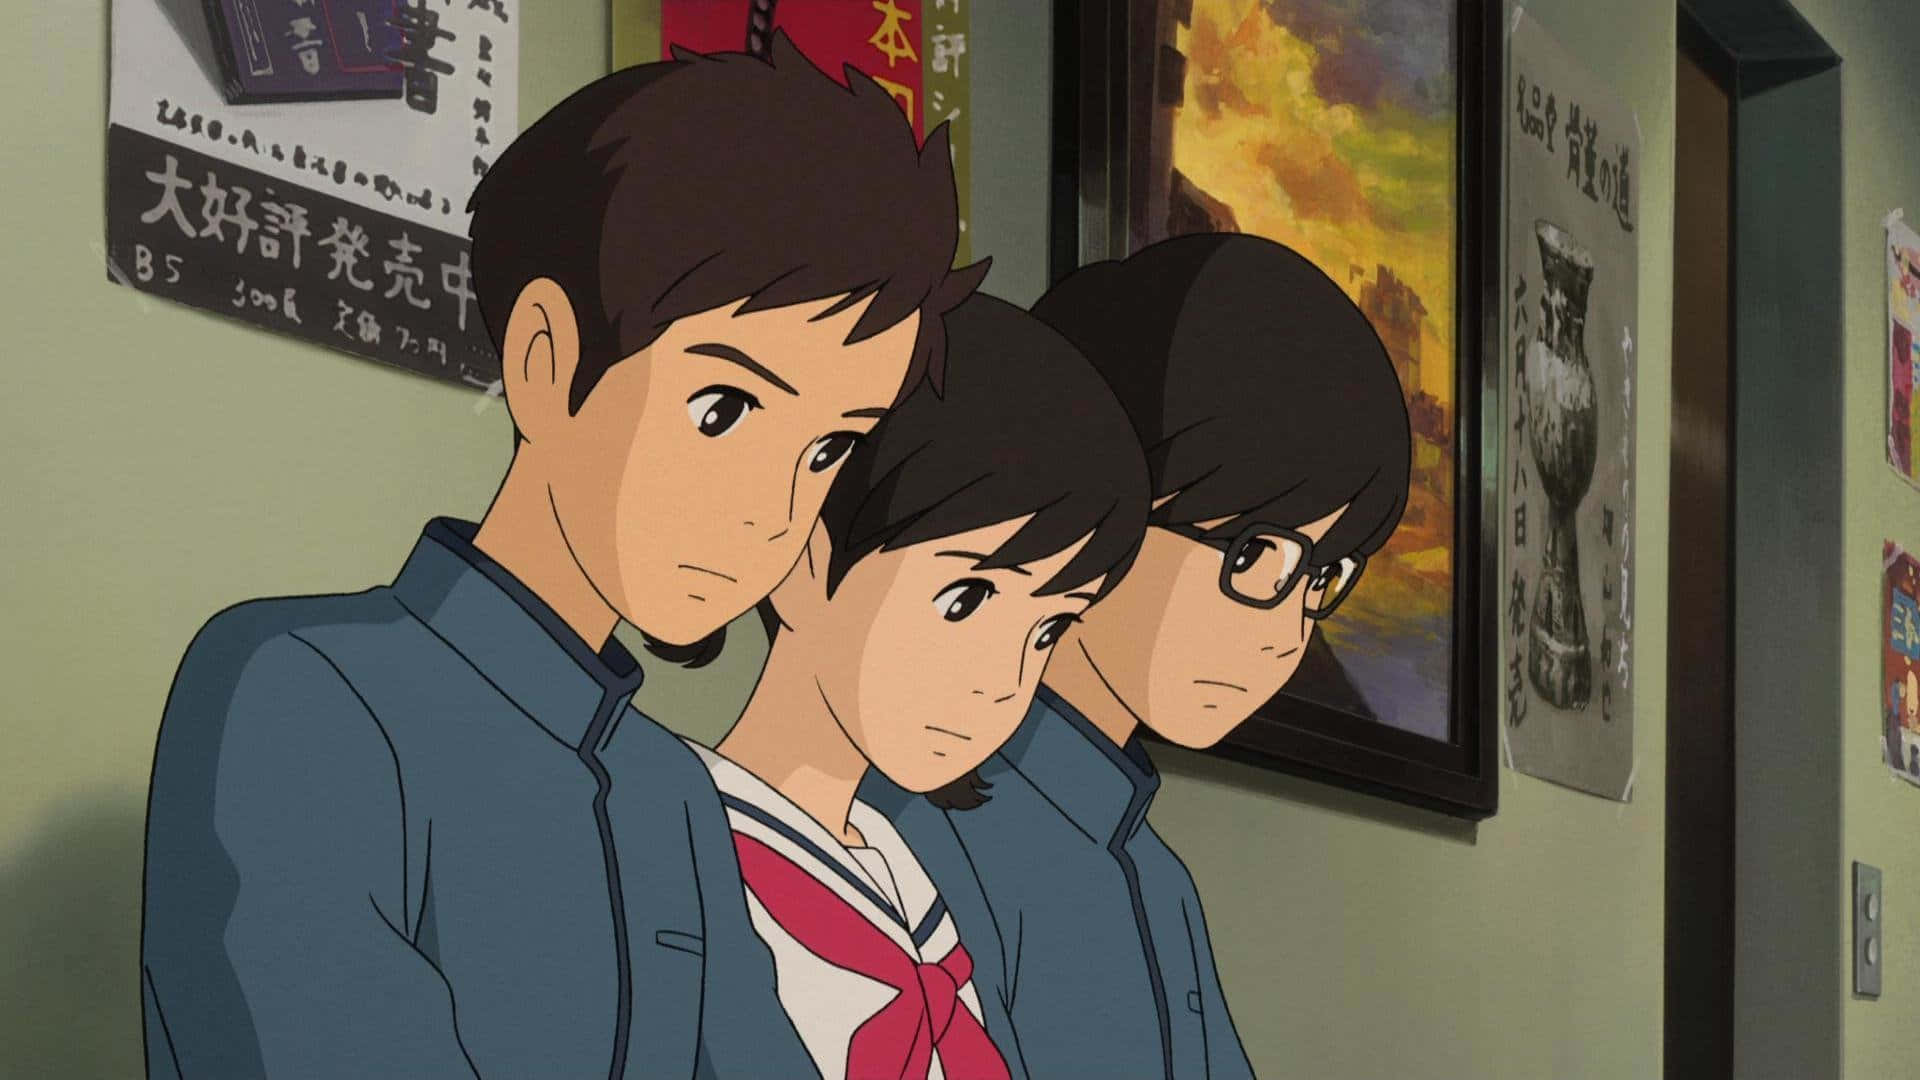 "A Reflection of Youthful Love in From Up On Poppy Hill"